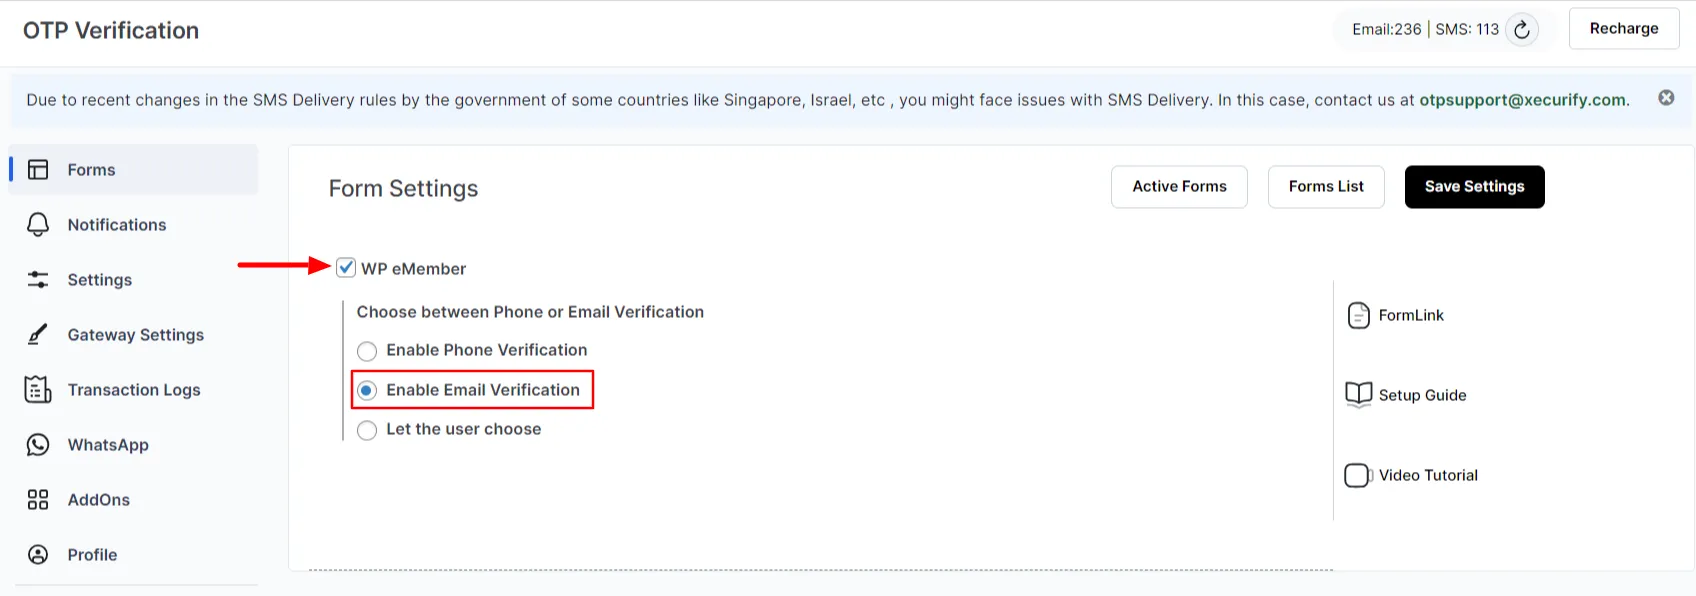 WP eMember Form - enable email verification